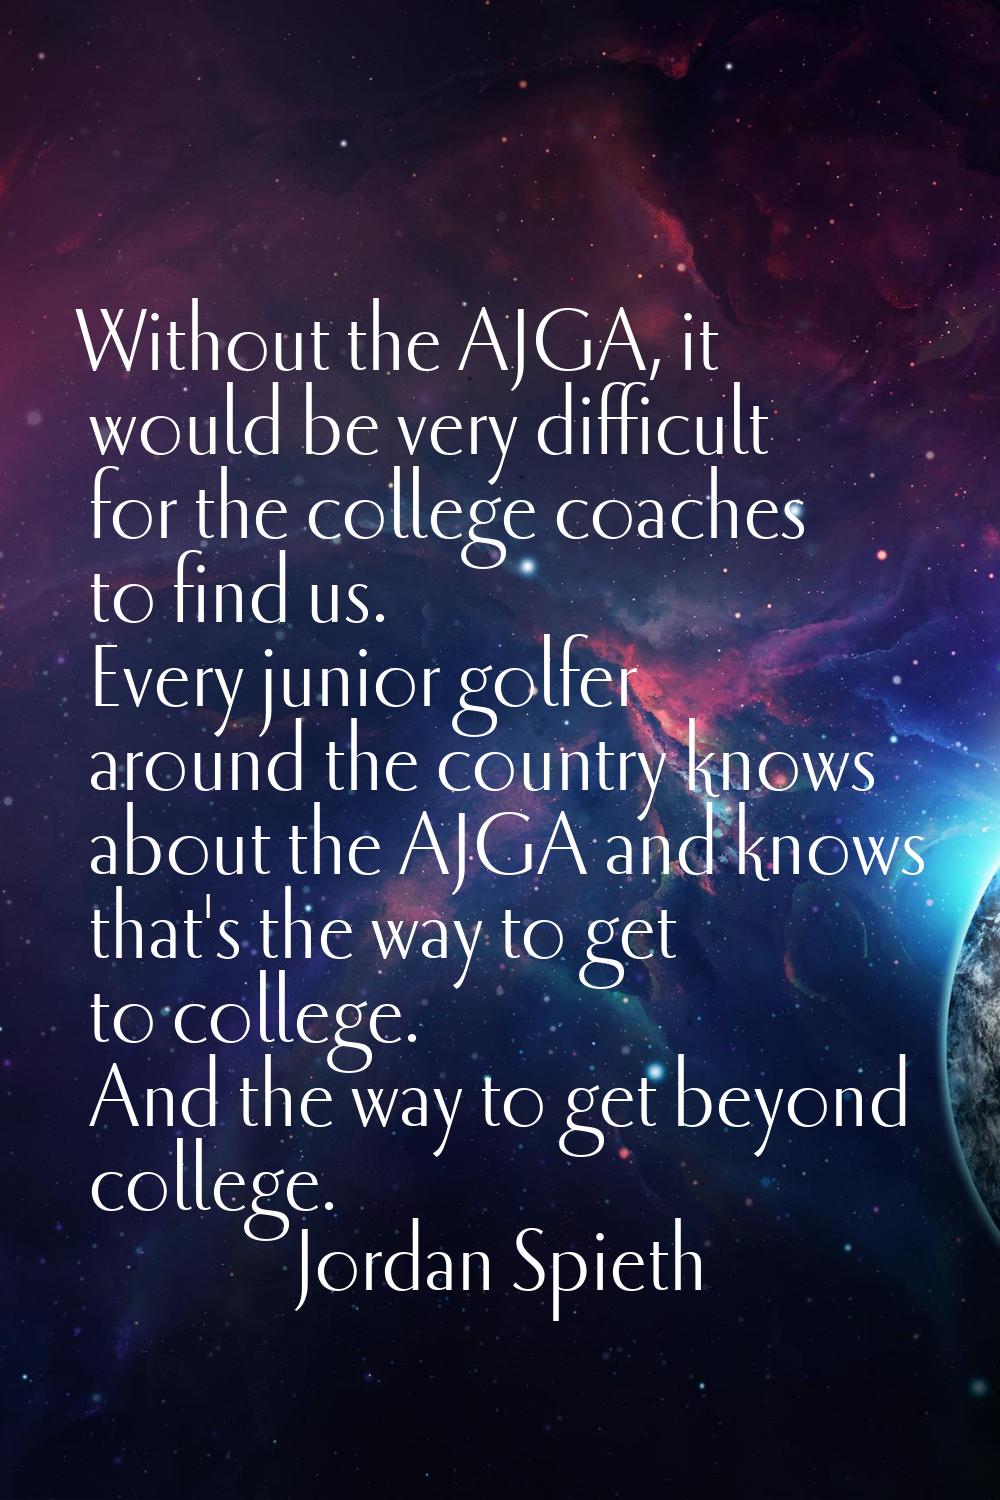 Without the AJGA, it would be very difficult for the college coaches to find us. Every junior golfe